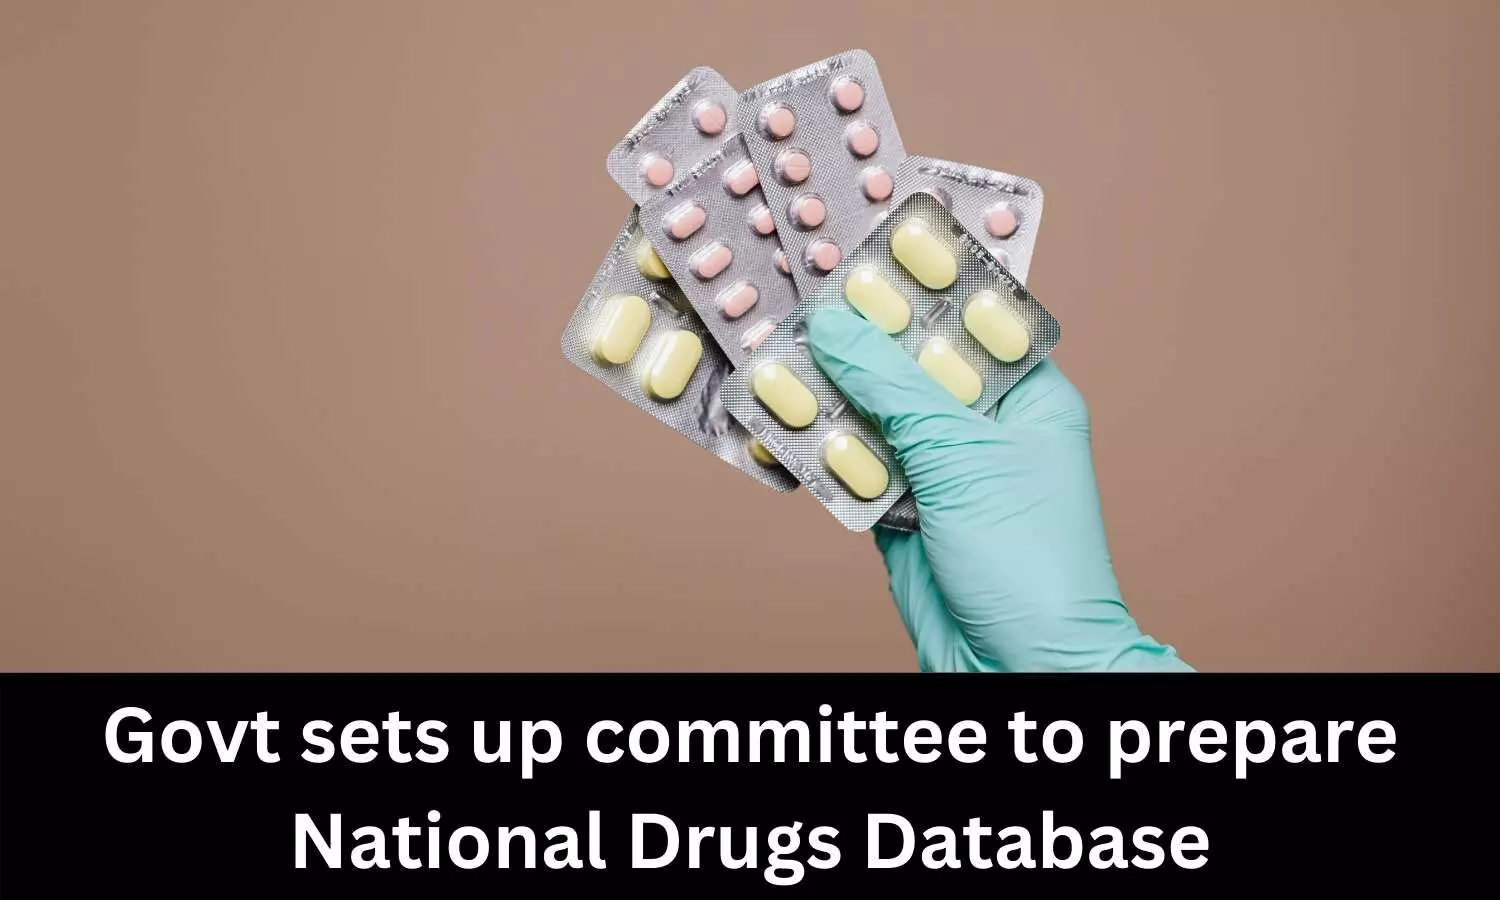 Health Ministry forms panel to prepare National Drugs Database